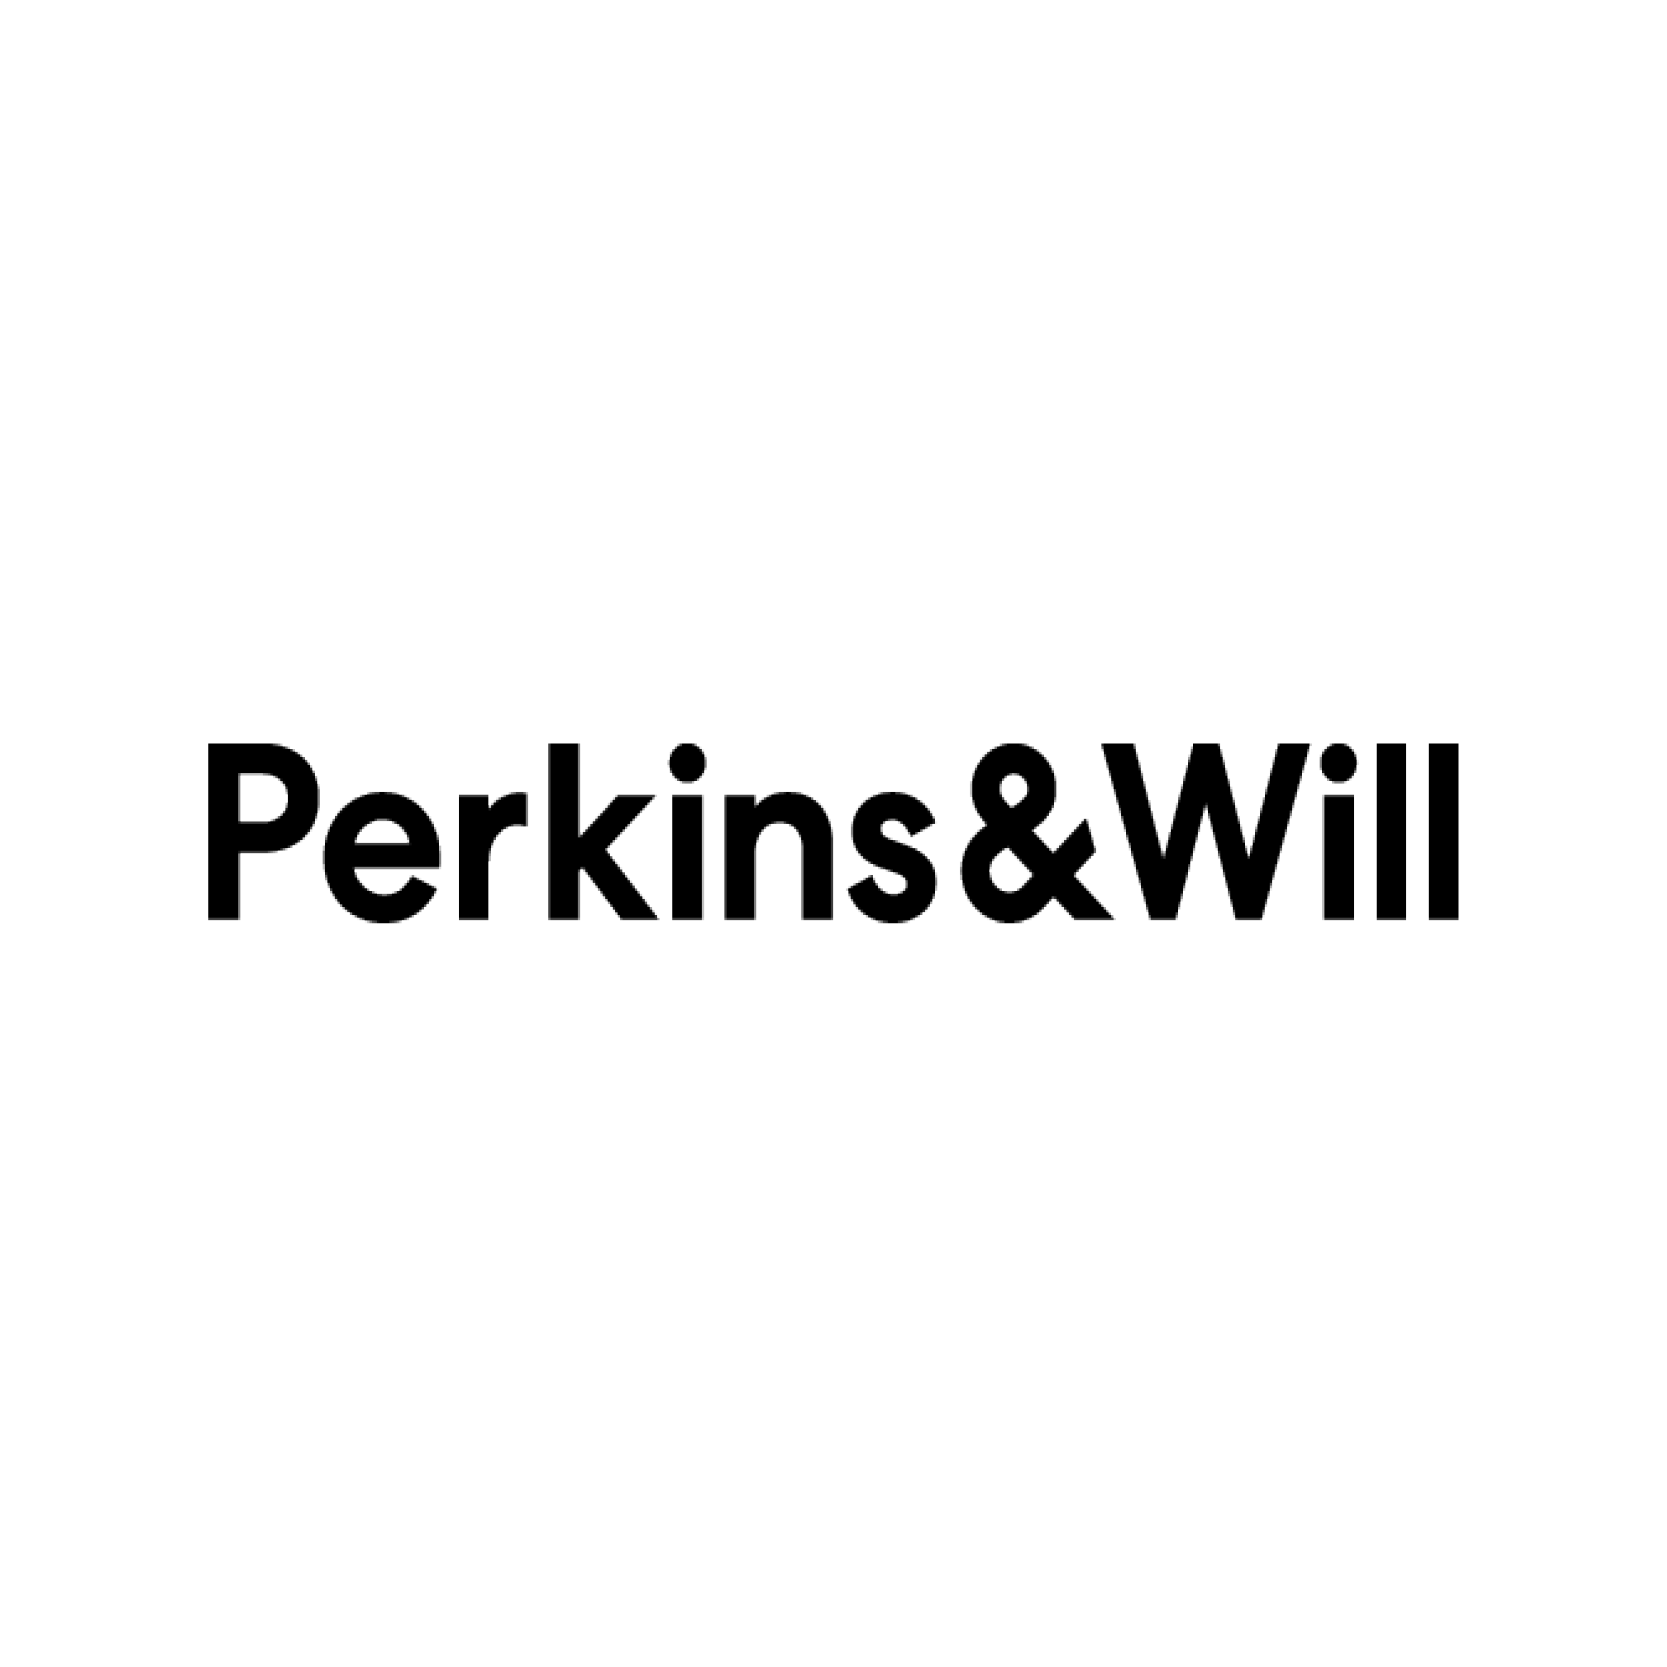 Perkins & Will logo BW tile 400px.png